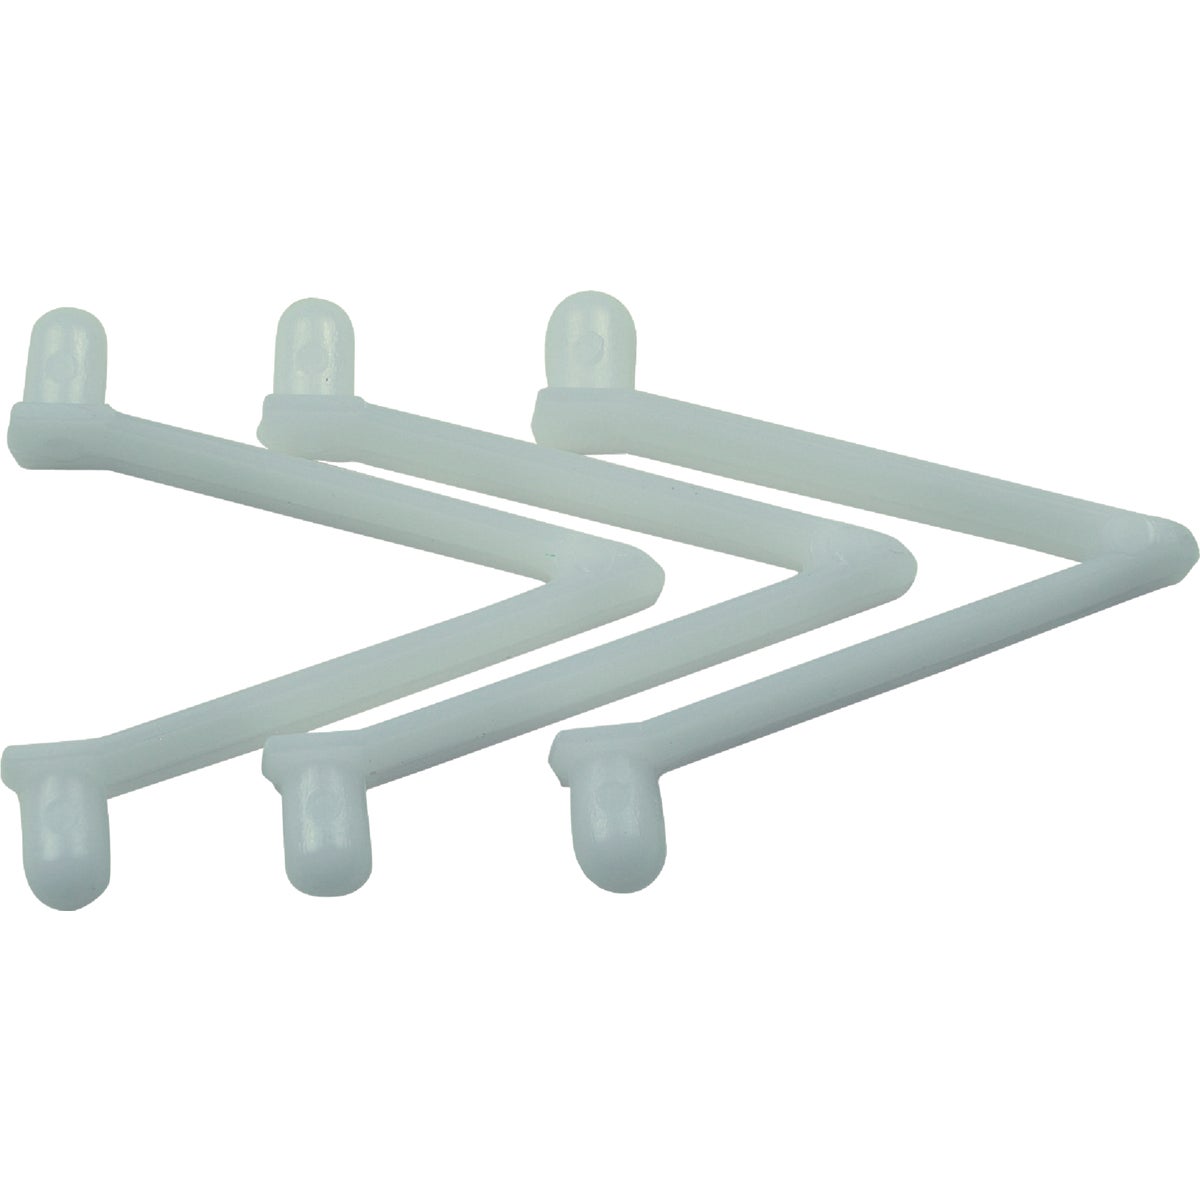 Item 813454, Replacement spring V-clips for pool maintenance equipment handles.